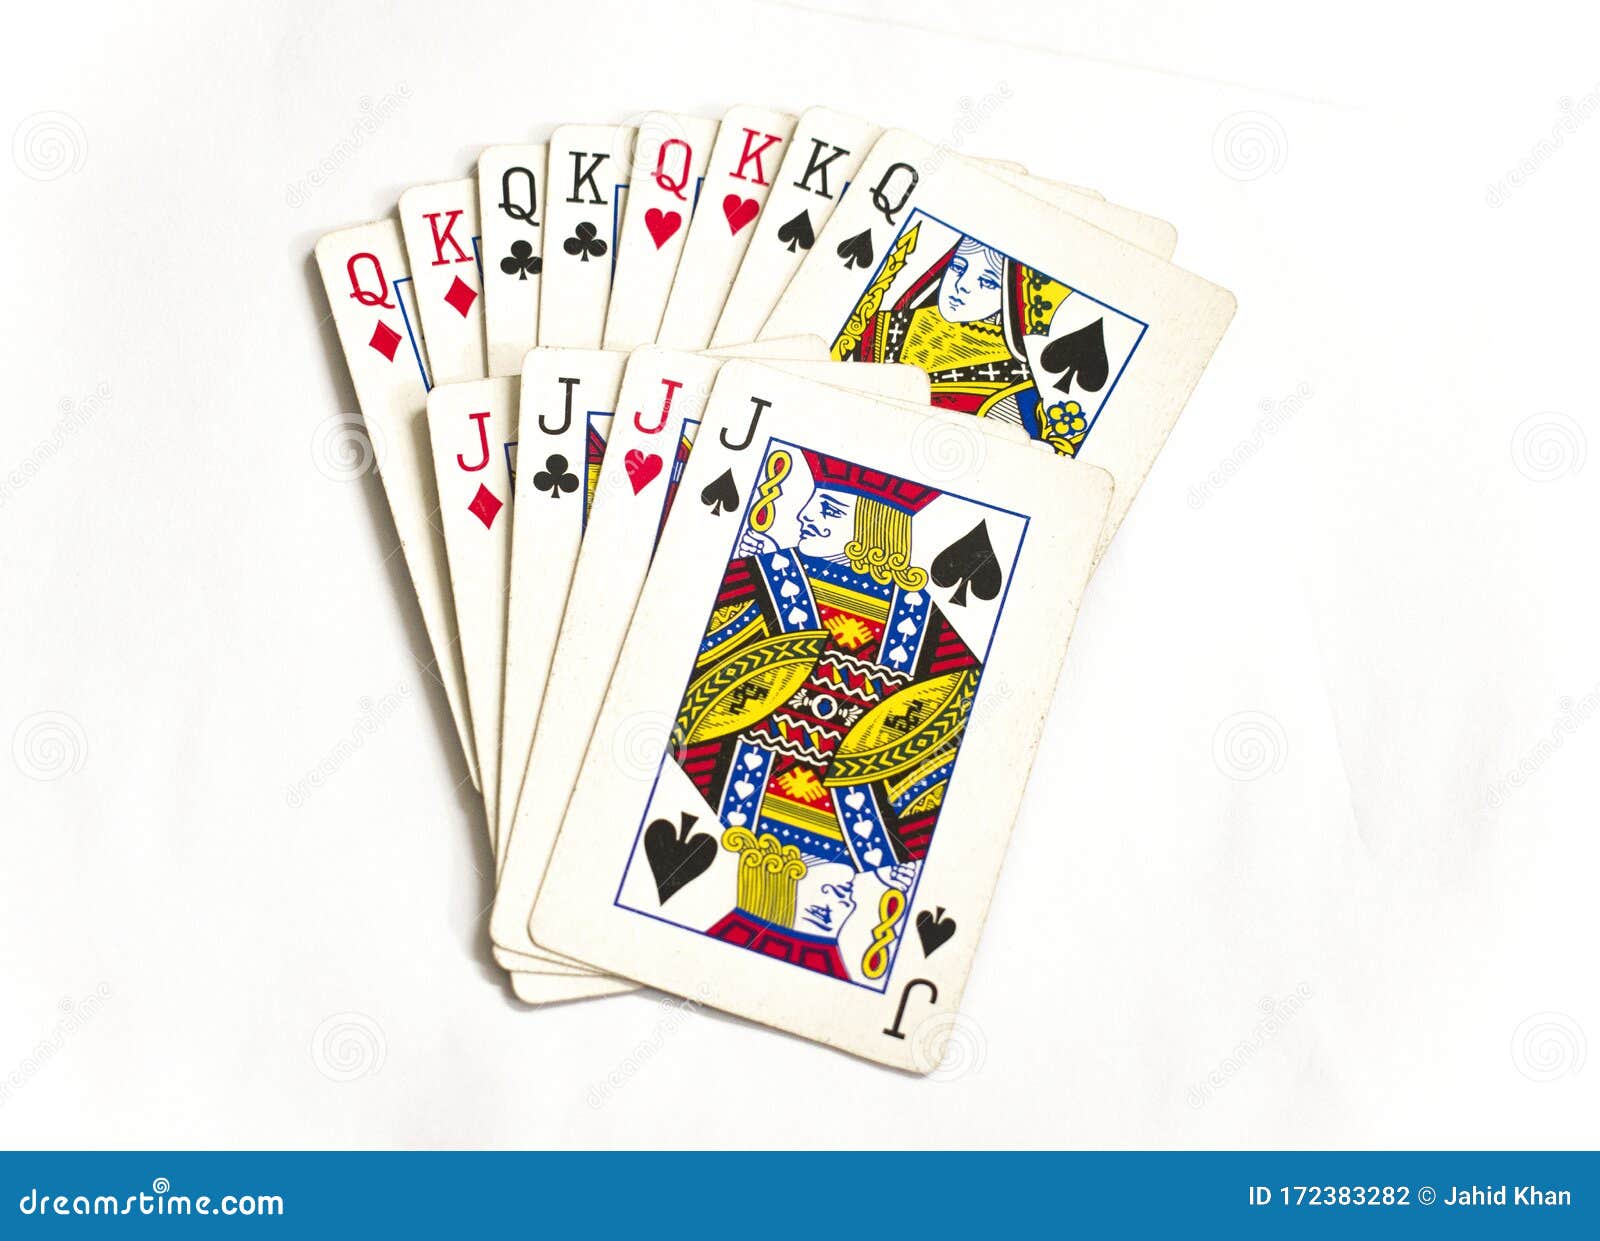 Playing Cards With King Queen And Joker Stock Photo Image Of Leisure Hearts